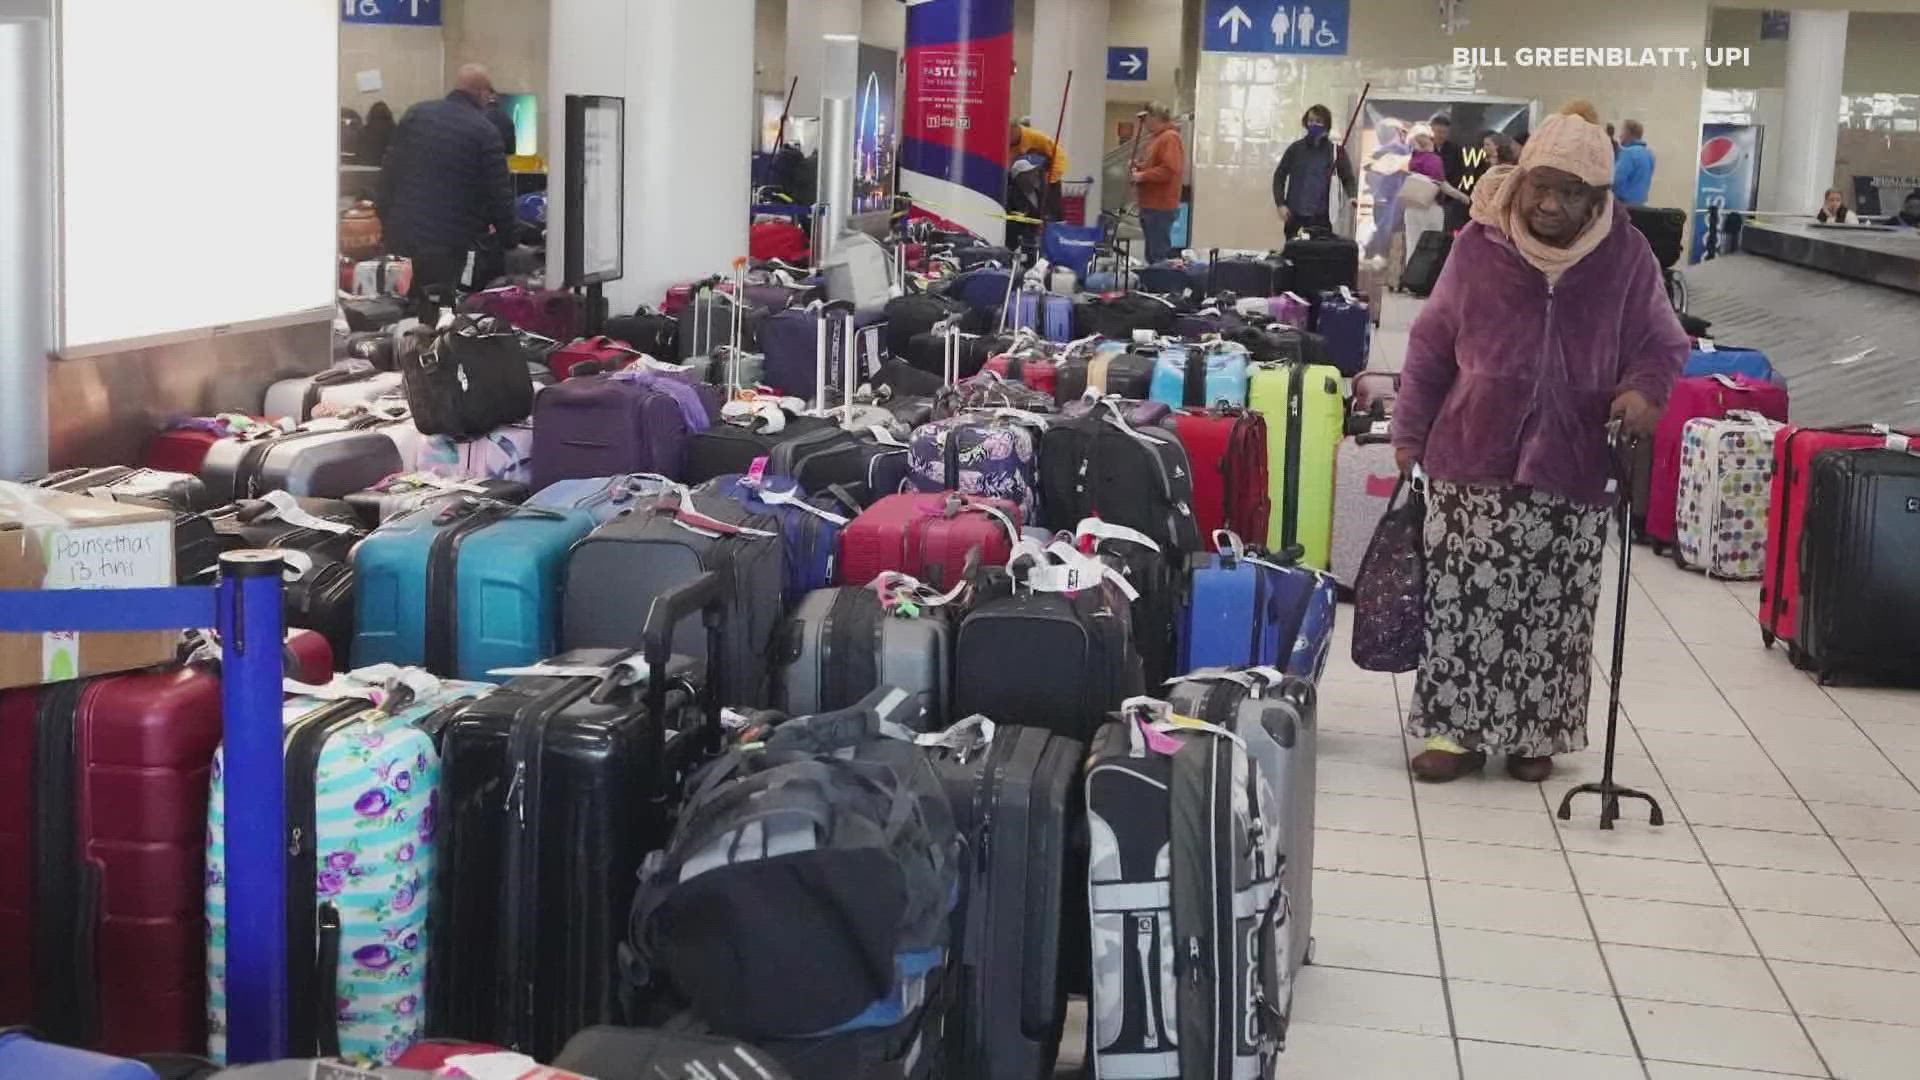 Several travelers are forced to go without their bags. They also have no idea when they will reach their destination.